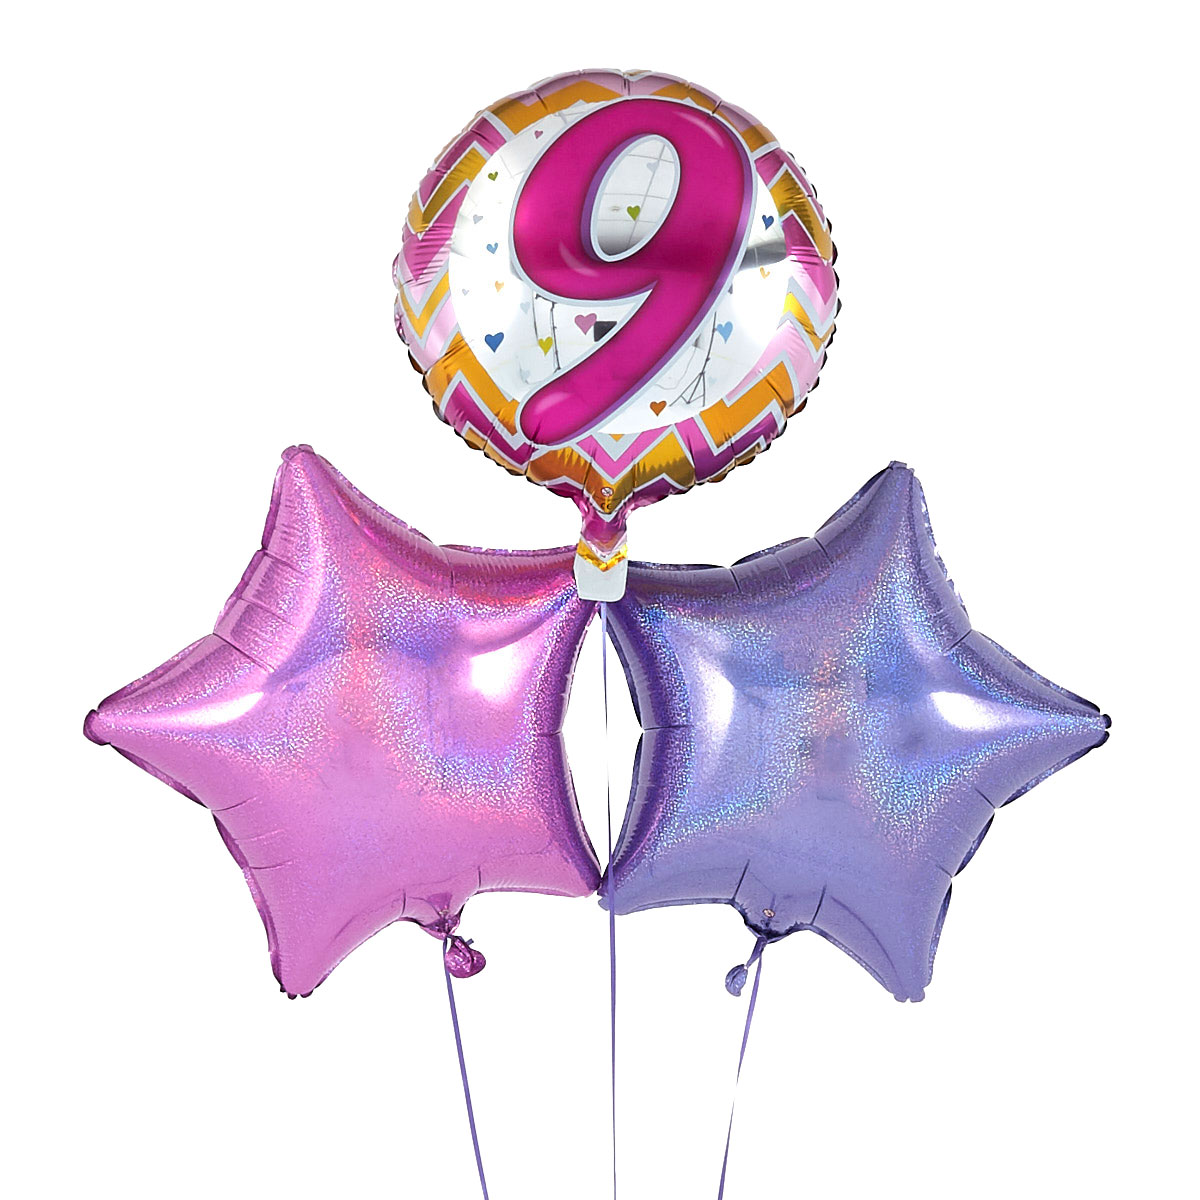 9th Birthday Zig-Zag Pink Balloon Bouquet - DELIVERED INFLATED!